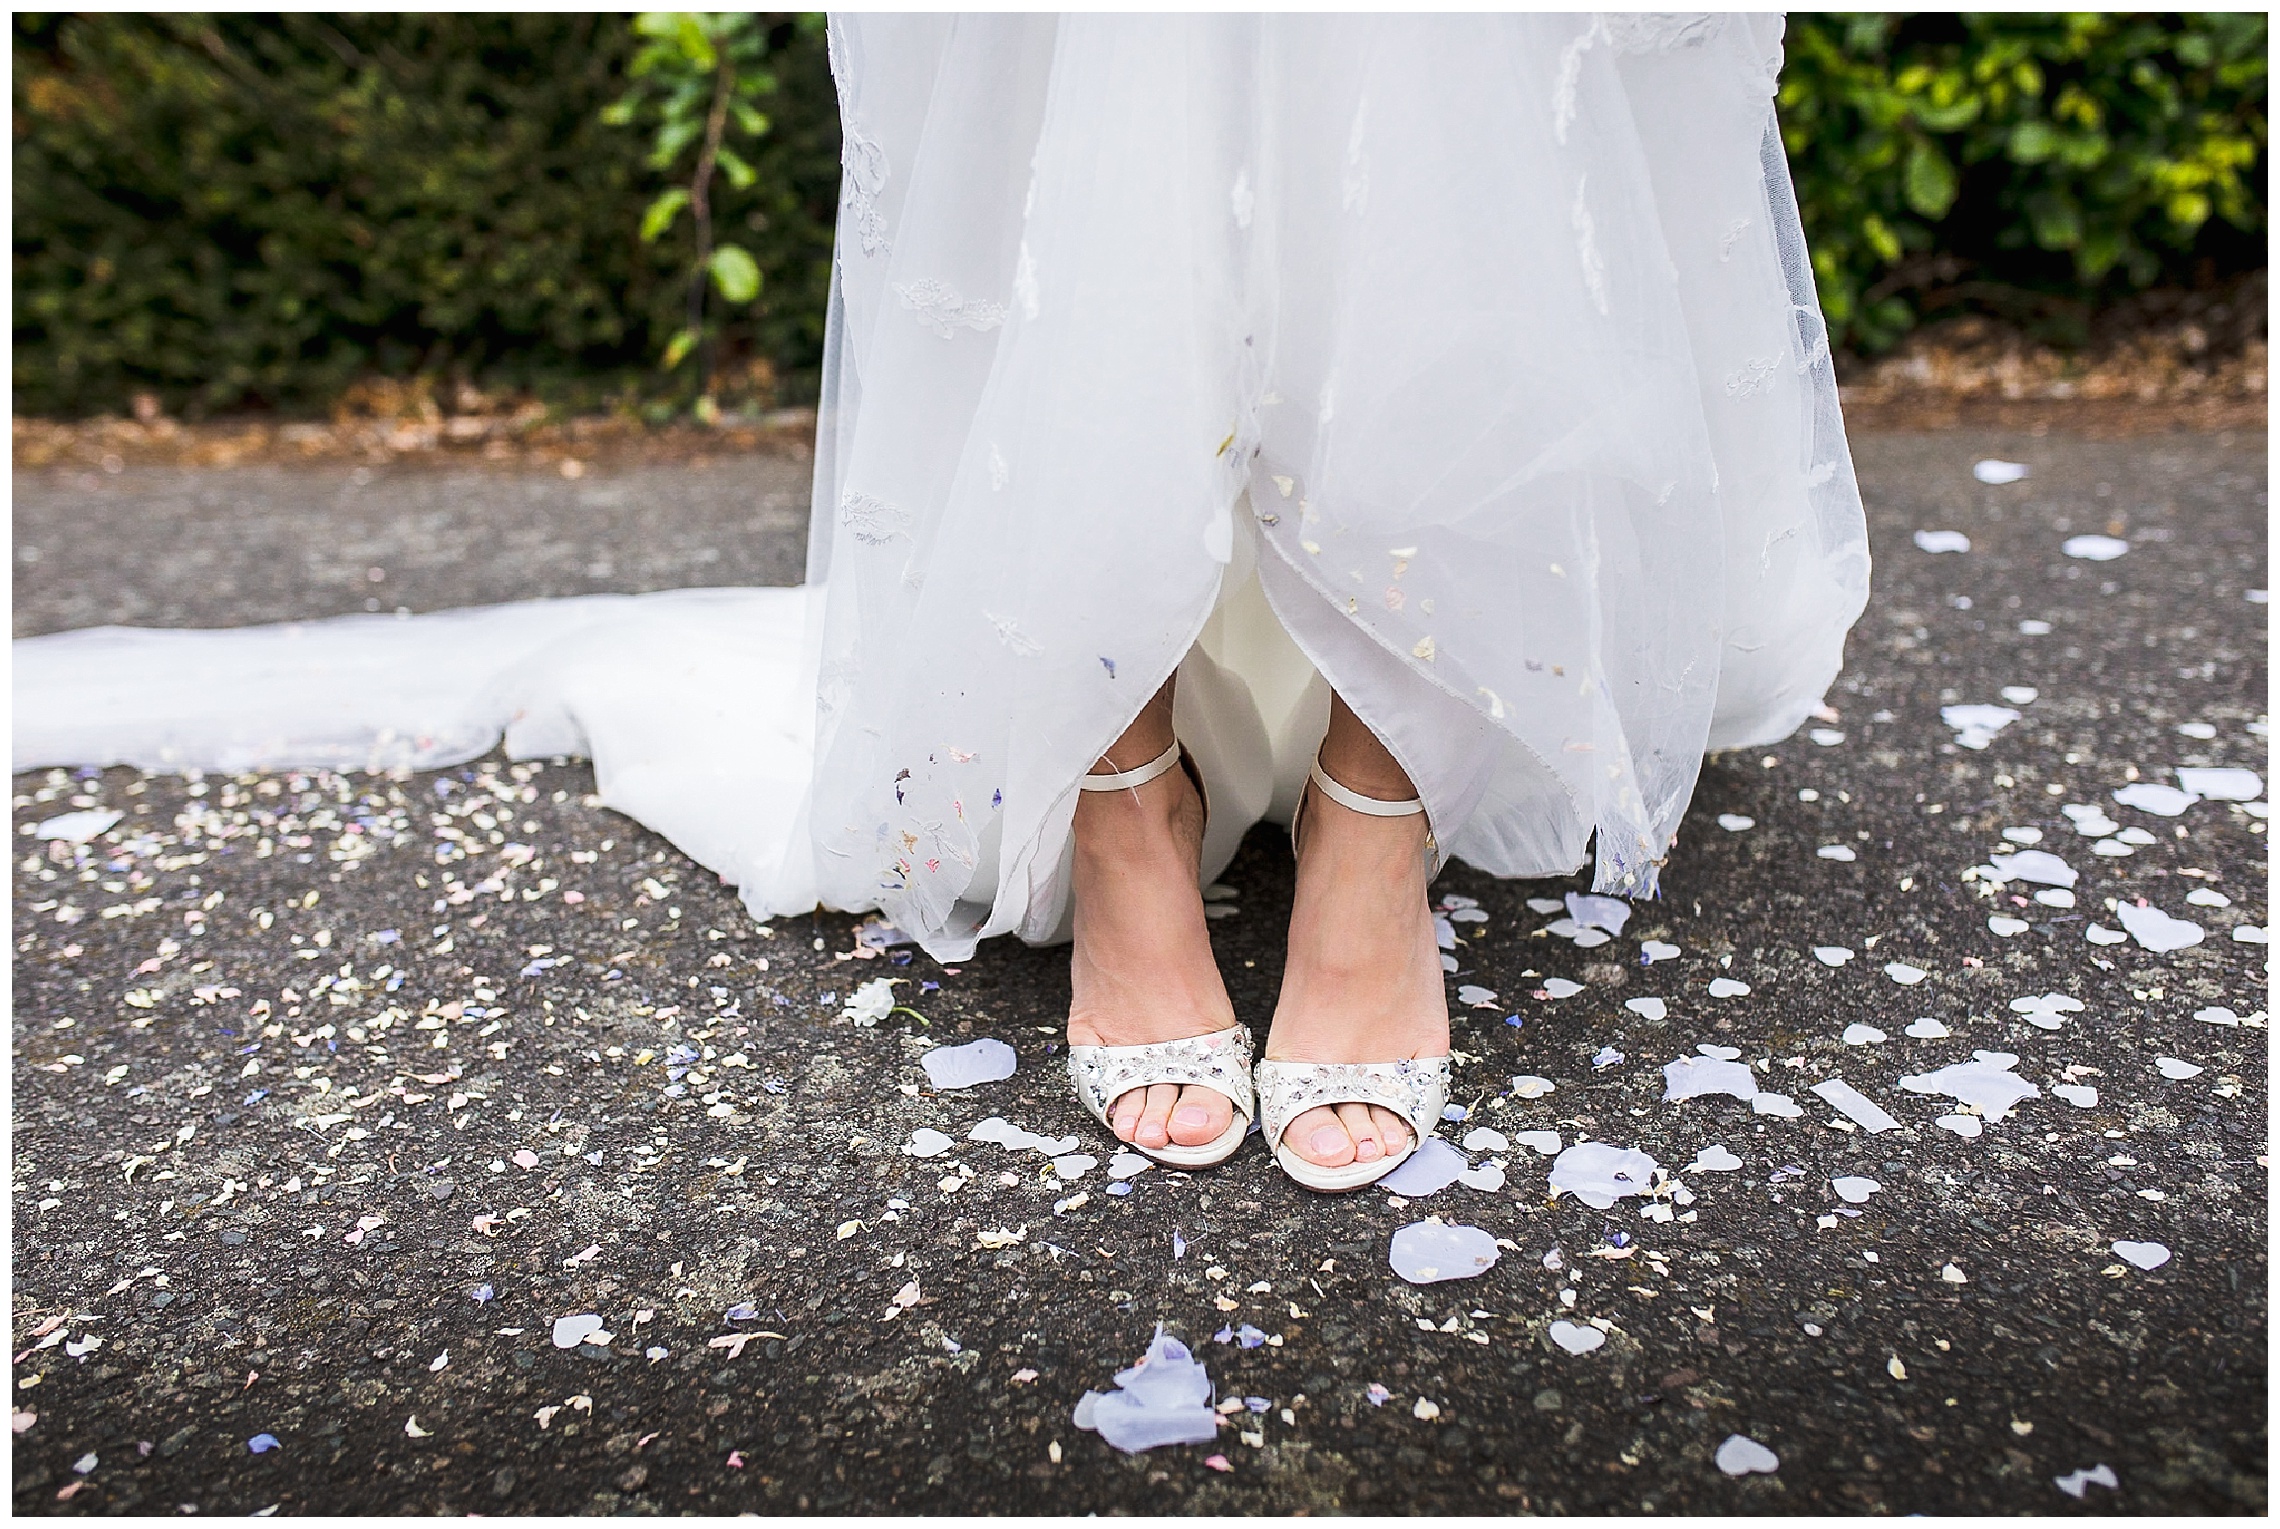 dolce and gabbana wedding shoes on bride holding dress up, surrounded by fallen confetti